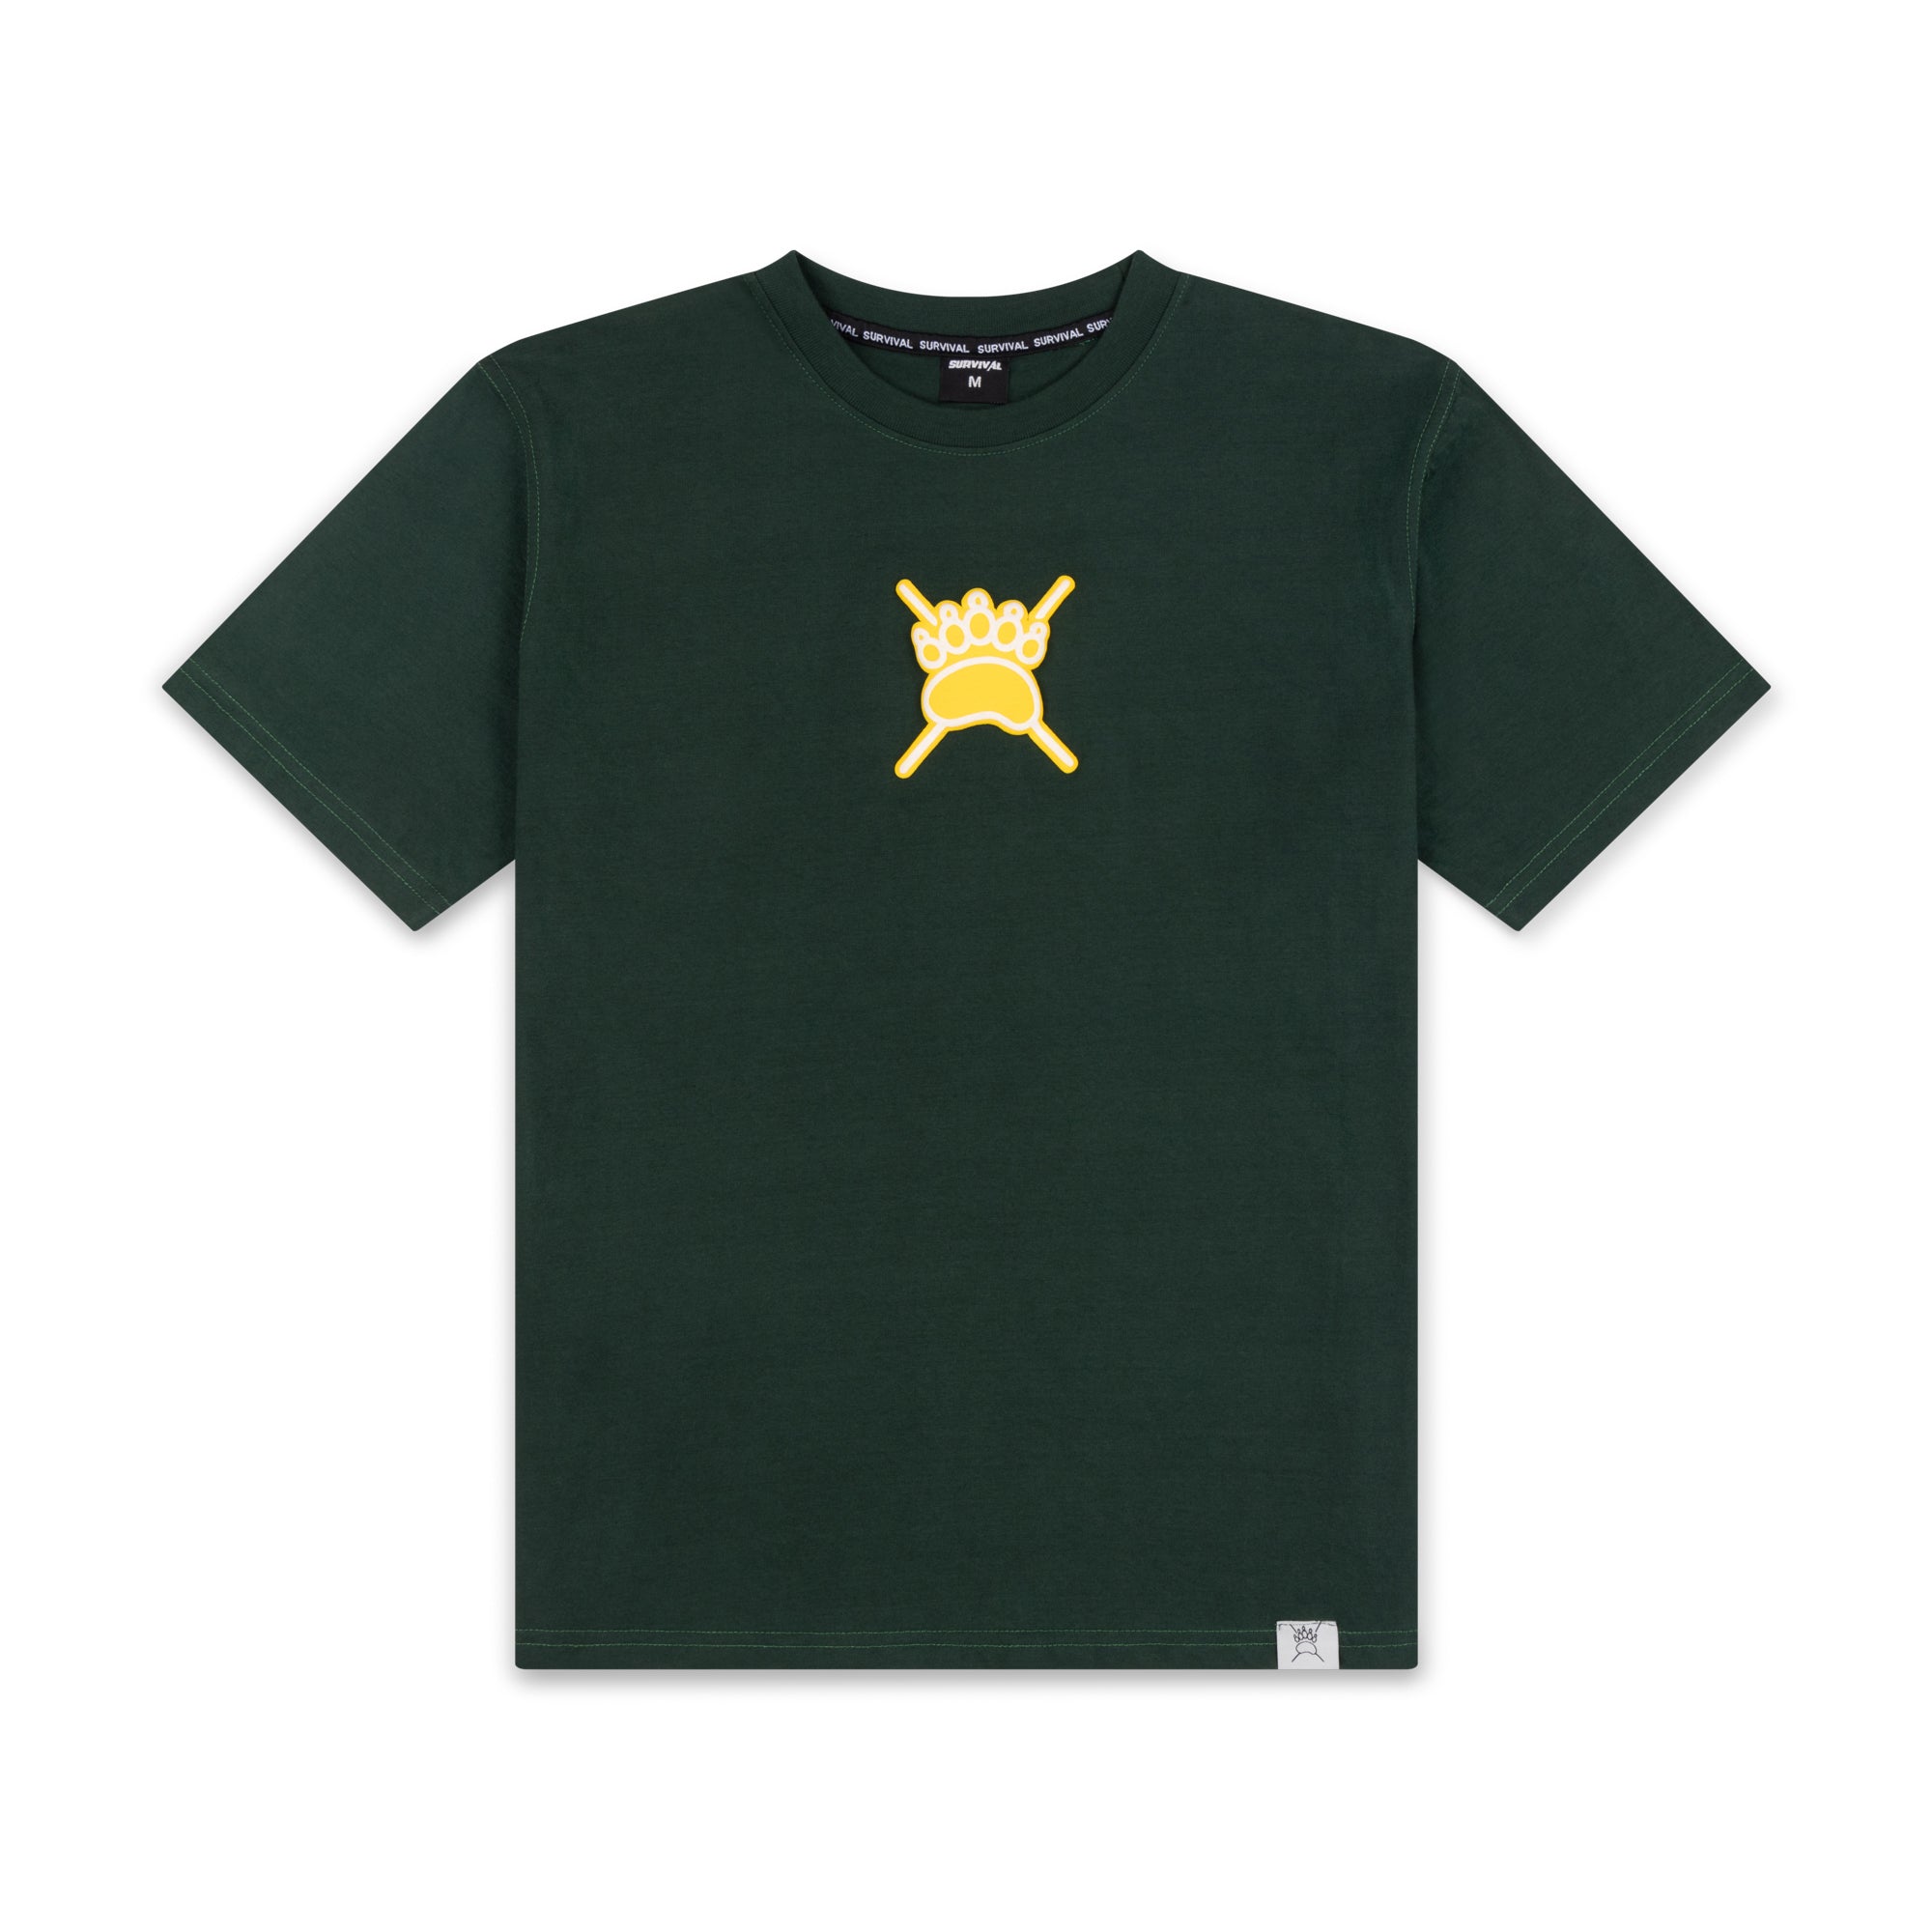 Green Breed T-Shirt | Bear Breed T-Shirt | The Survival Couture